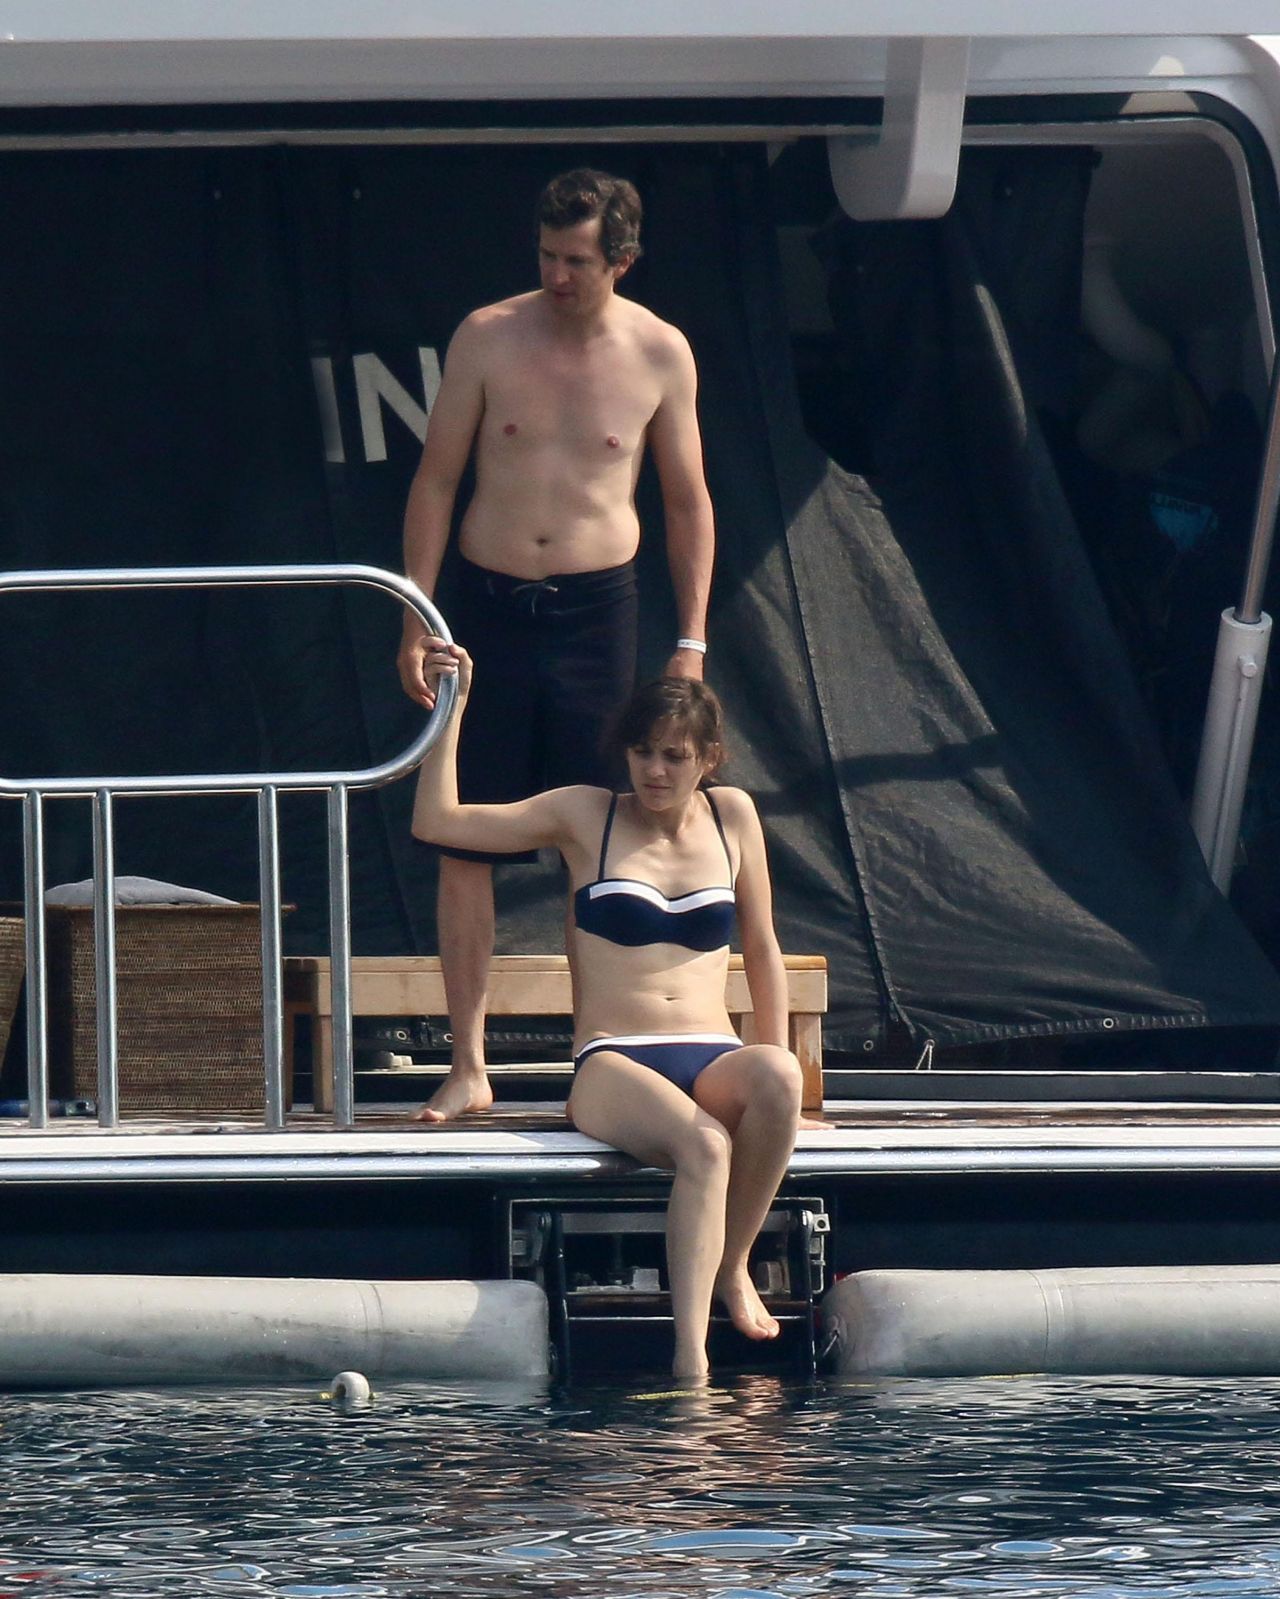 marion-cotillard-in-a-bikini-on-a-yacht-in-cannes-june-2014_4.